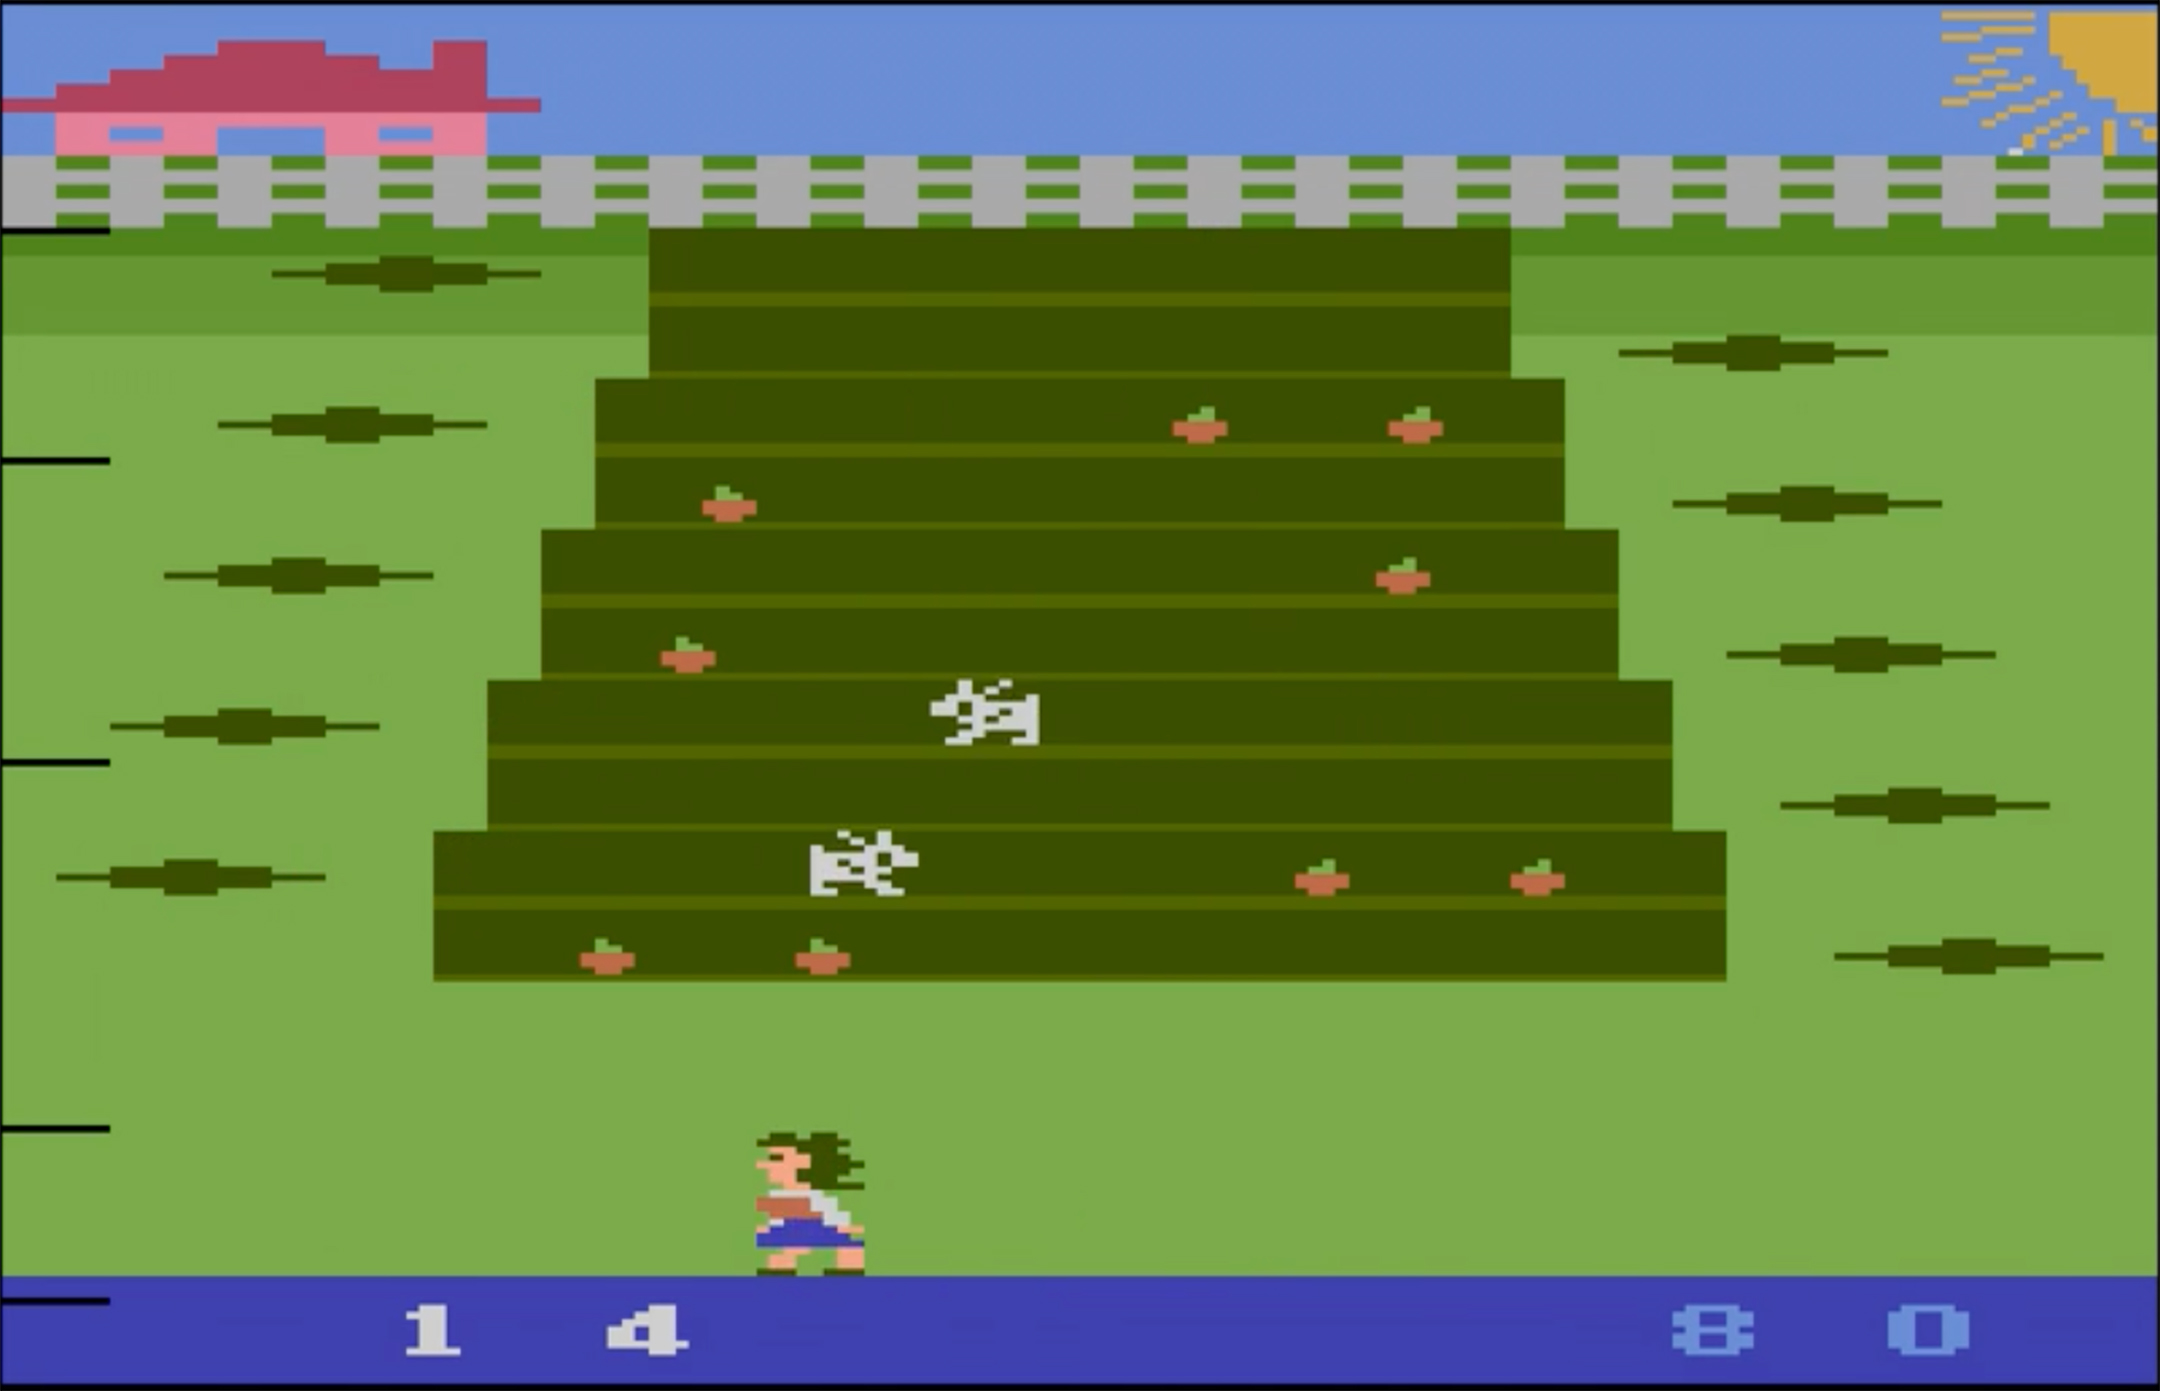 Screenshot from the game Wabbit, with a female character at the bottom of the screen, a garden filling the screen, and rabbits in the garden 